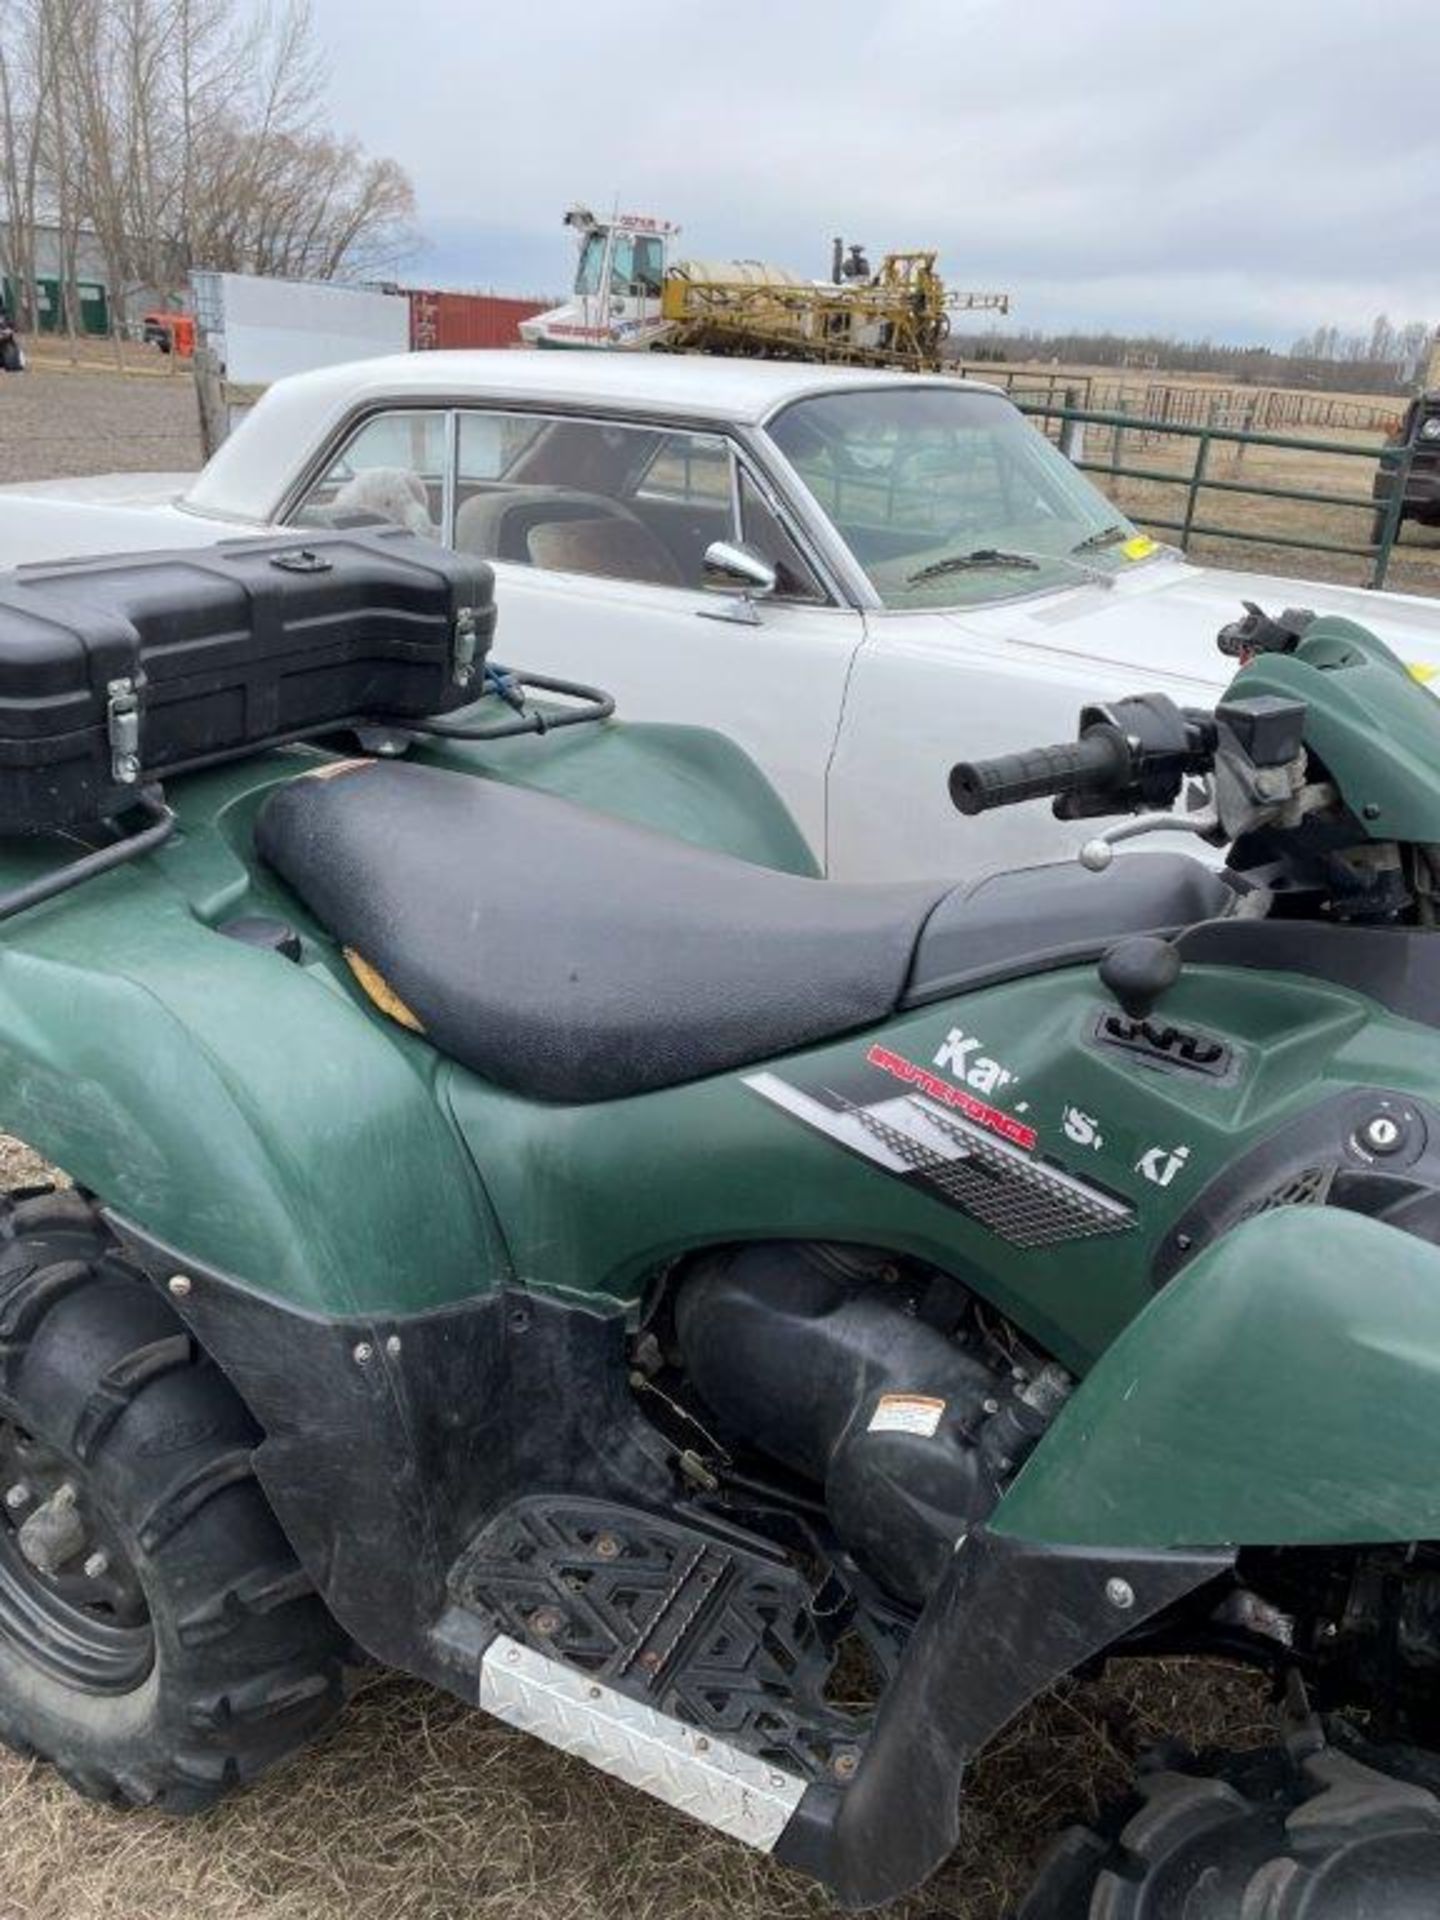 2007 KAWASAKI BRUTE FORCE 750 ATV 4X4 AUTO, RECENT CARB CLEAN, NEW BATTERY, 1762 KM'S SHOWING - Image 15 of 19